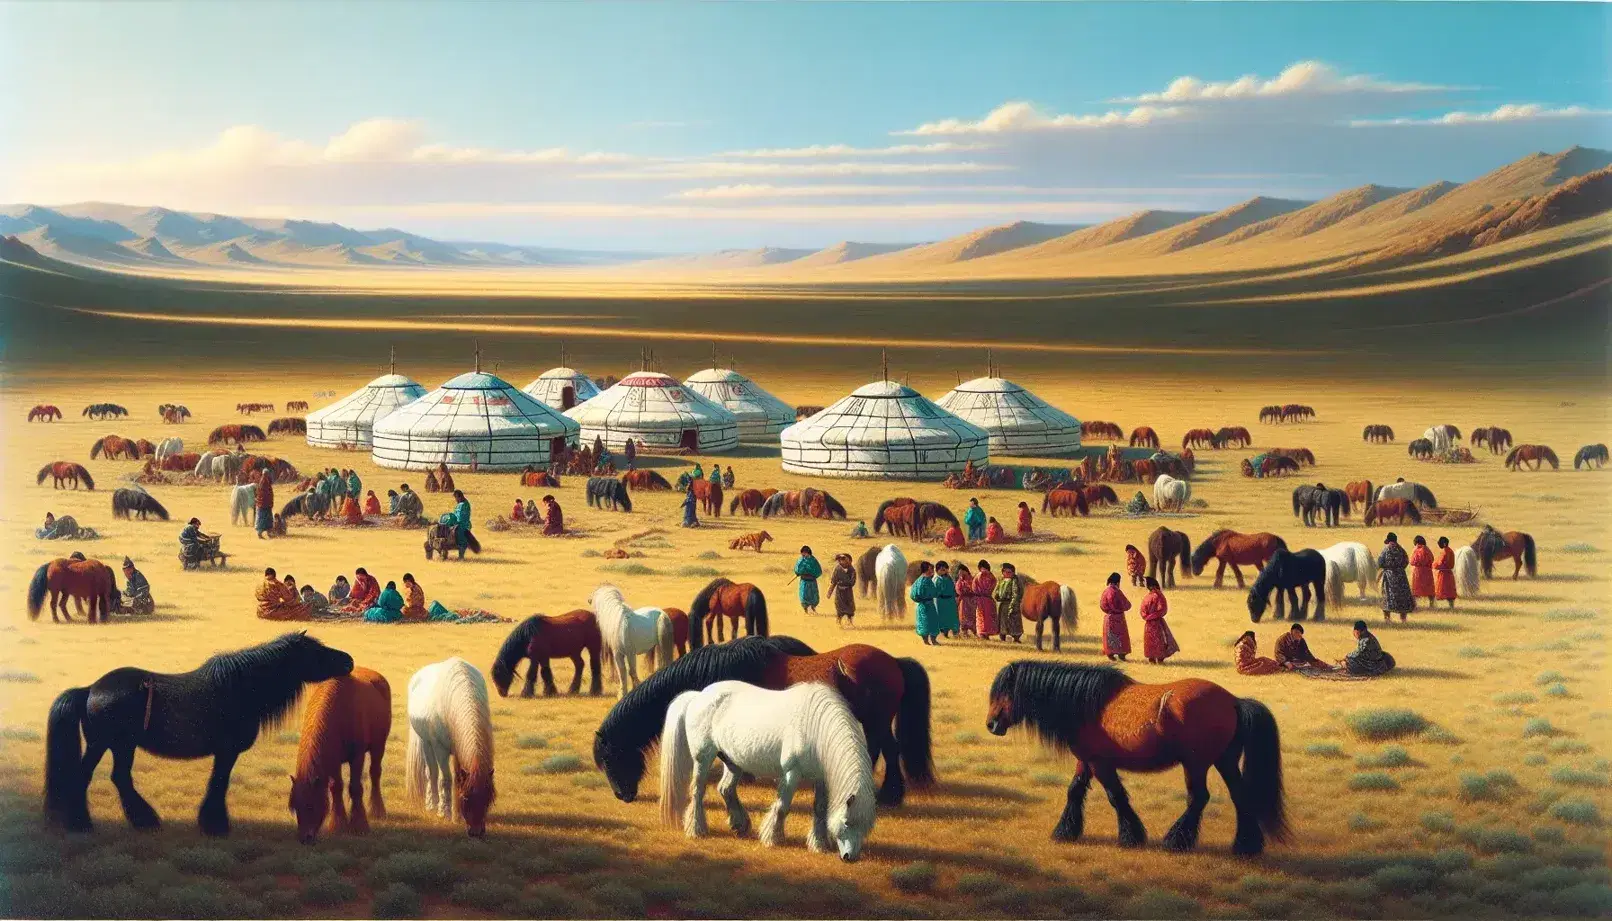 Mongolian horses graze on a sparse grassland steppe with traditional gers and locals in colorful attire under a clear blue sky.